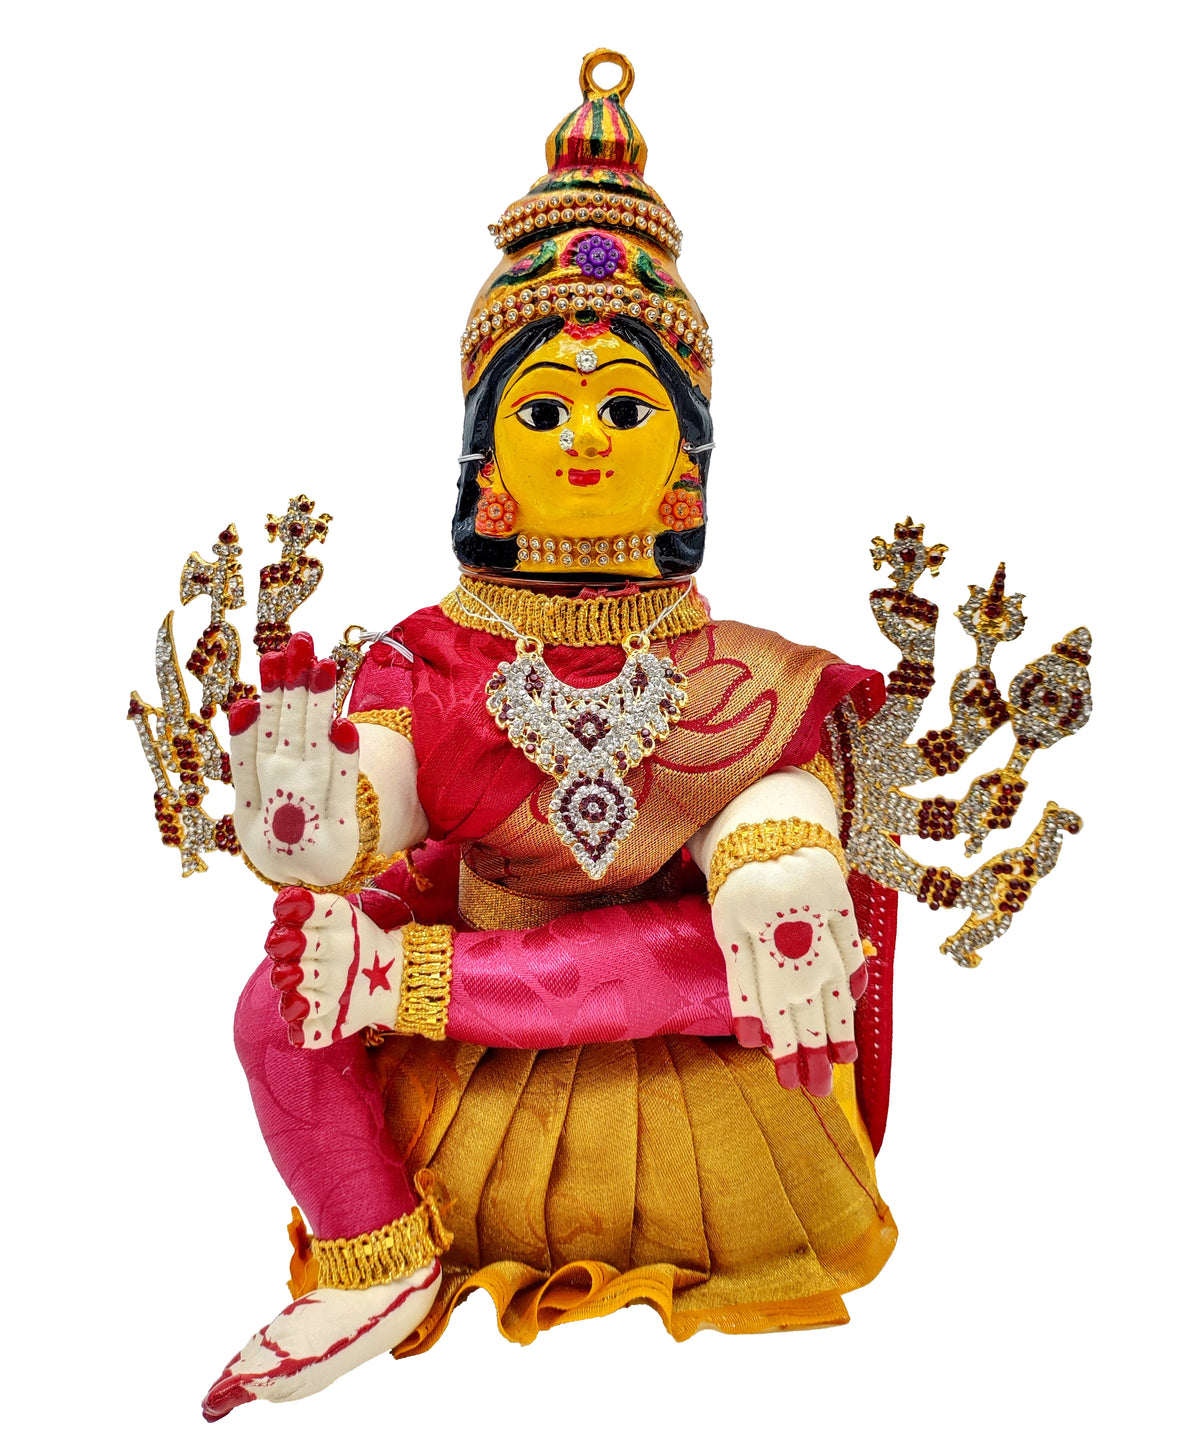 Special Durga Decorated Body [ Height - 11 inches , Width - 10 inches ]